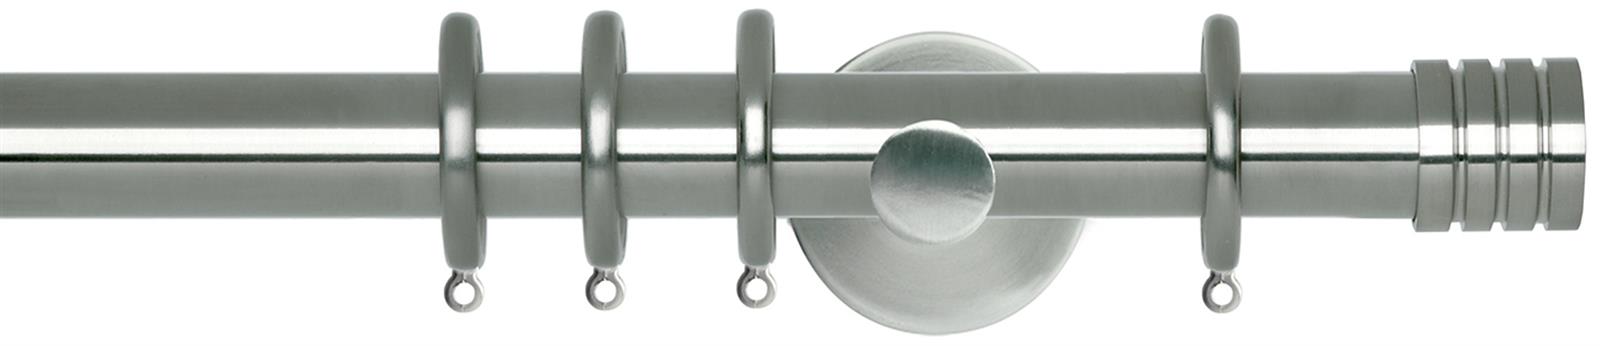 Neo 28mm Pole Stainless Steel Cylinder Stud